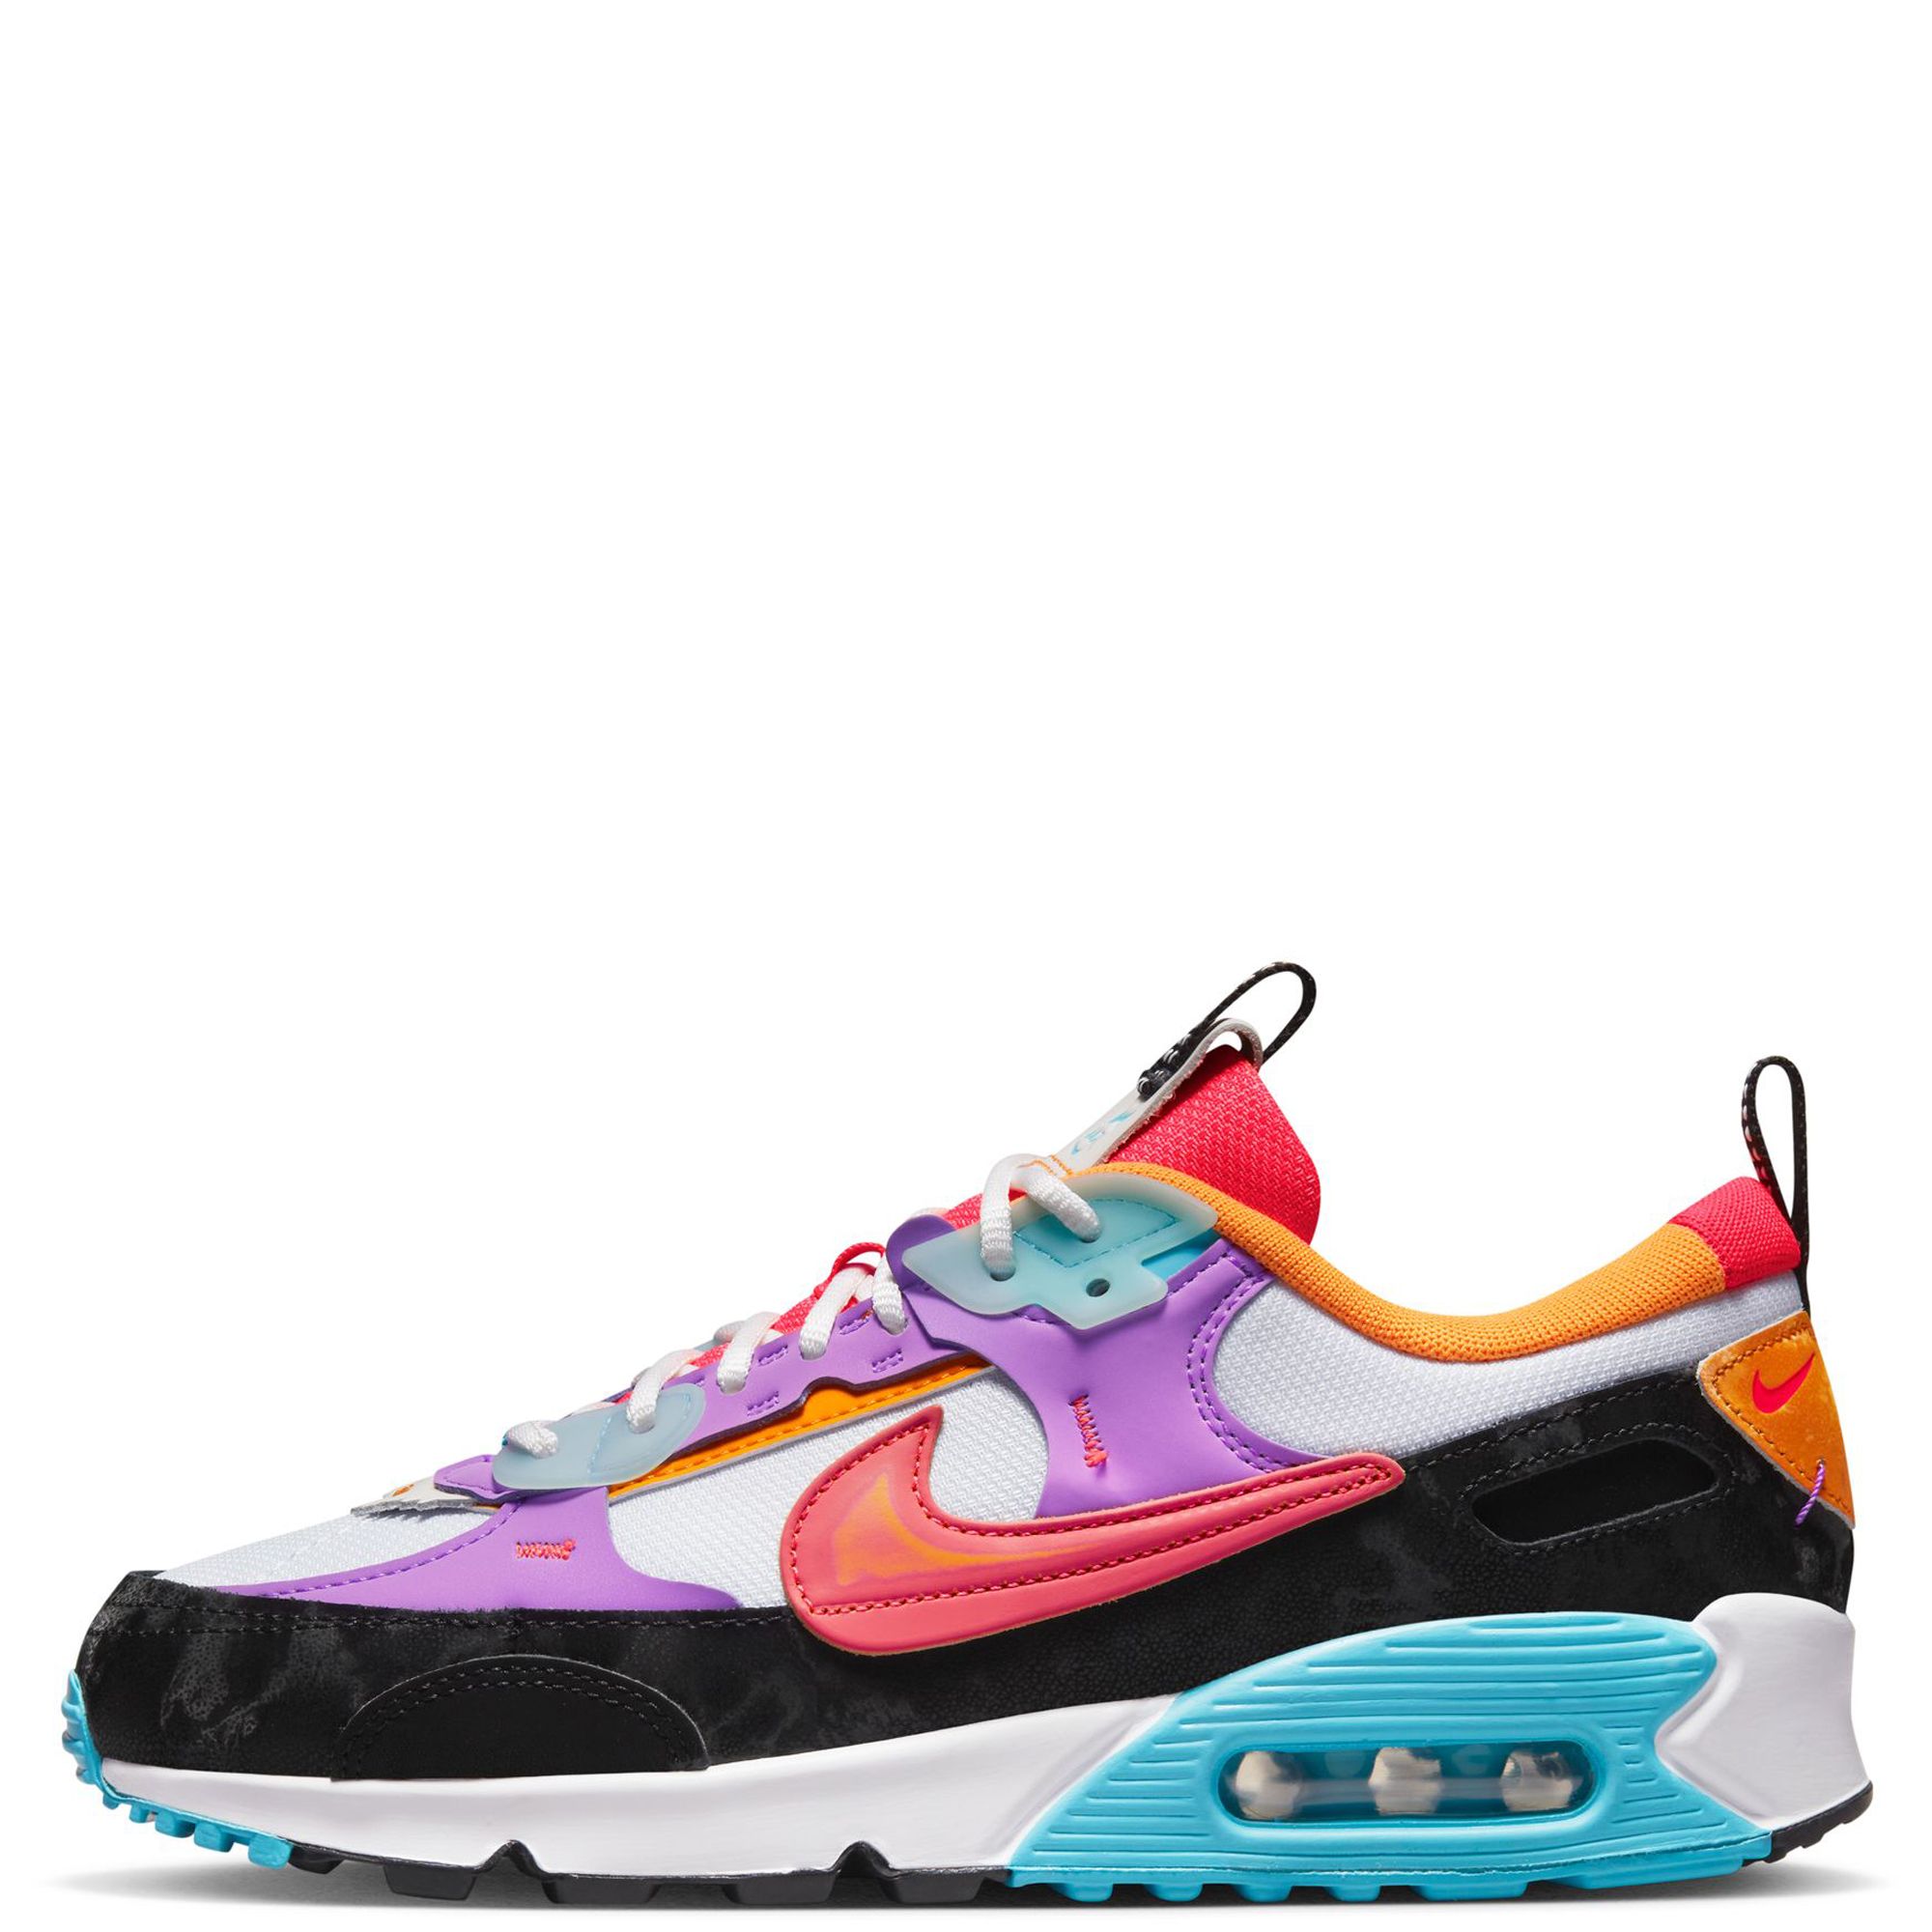 Nike Air Max 90 Futura sneakers in white and pink